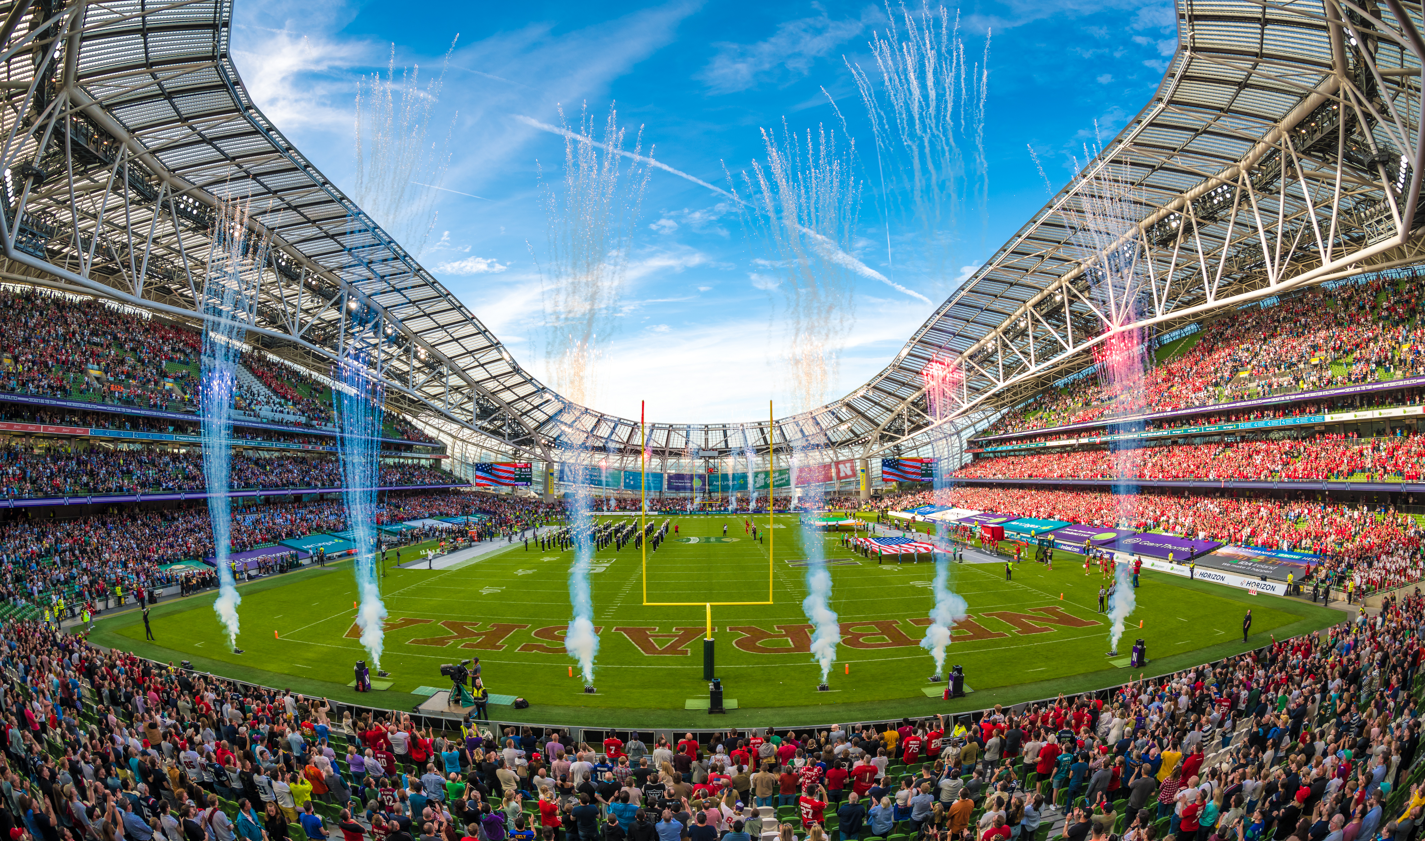 €180m Impact on Irish Economy Generated by Aer Lingus College Football Classic 2023 Game